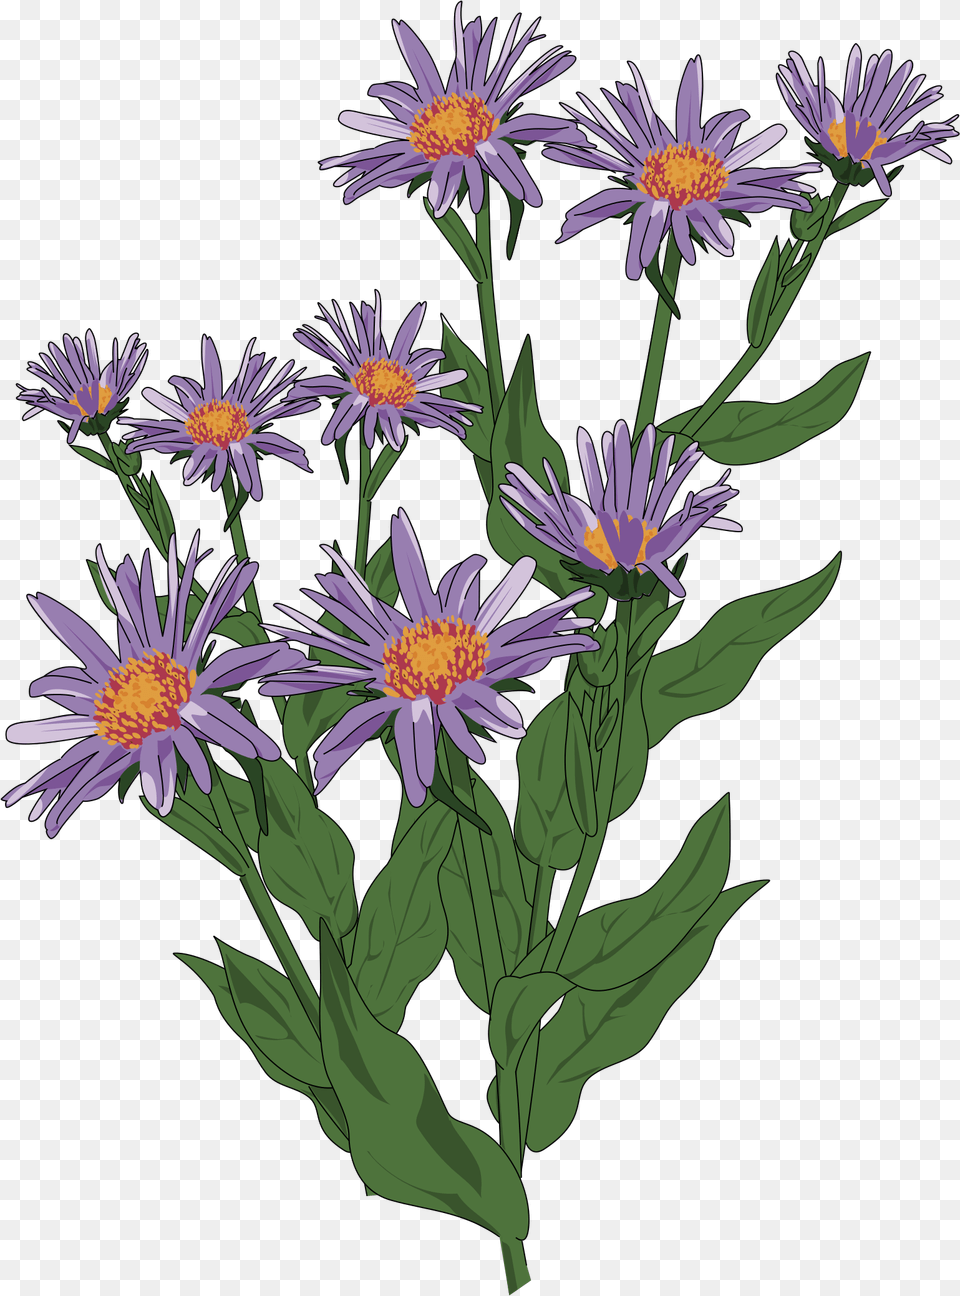 Wildflower Clipart Flowering Plant New England Aster, Daisy, Flower Png